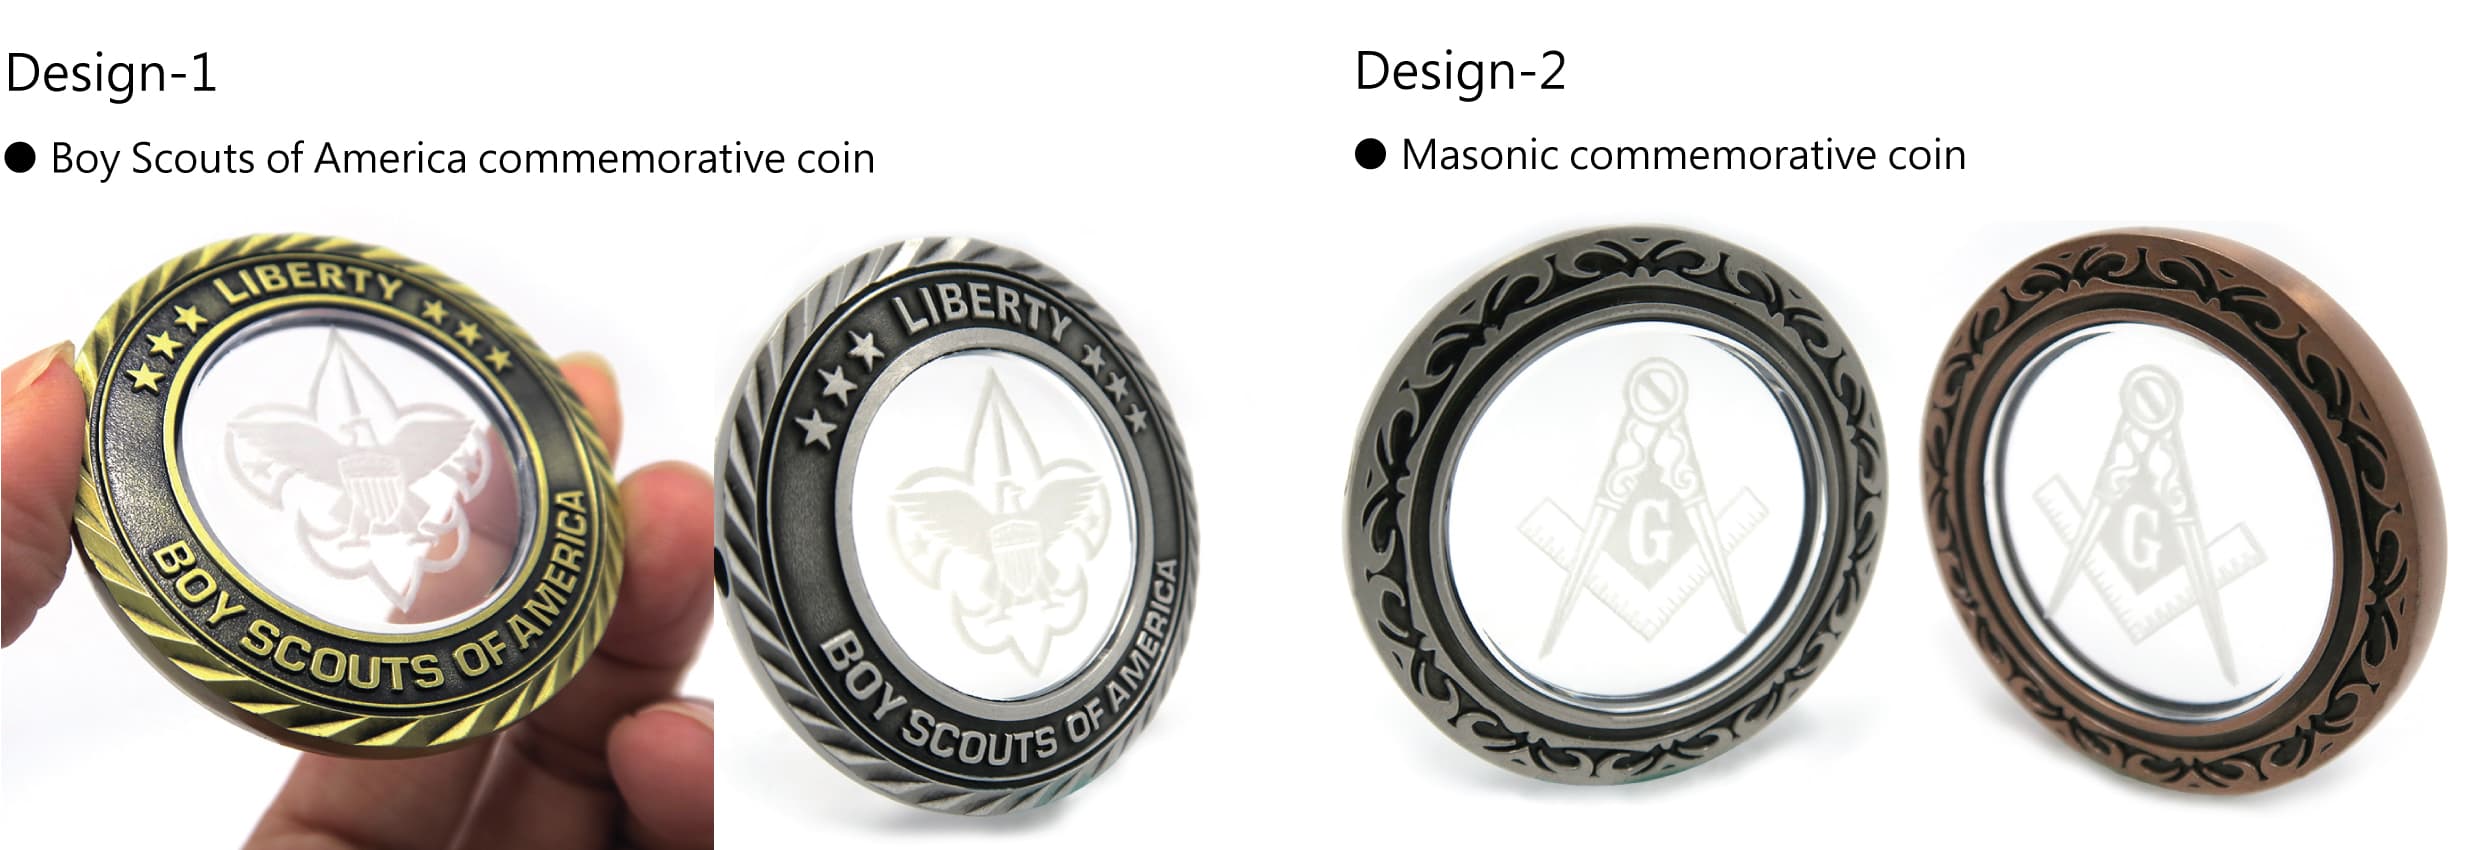  Existing Designs Coins for Option